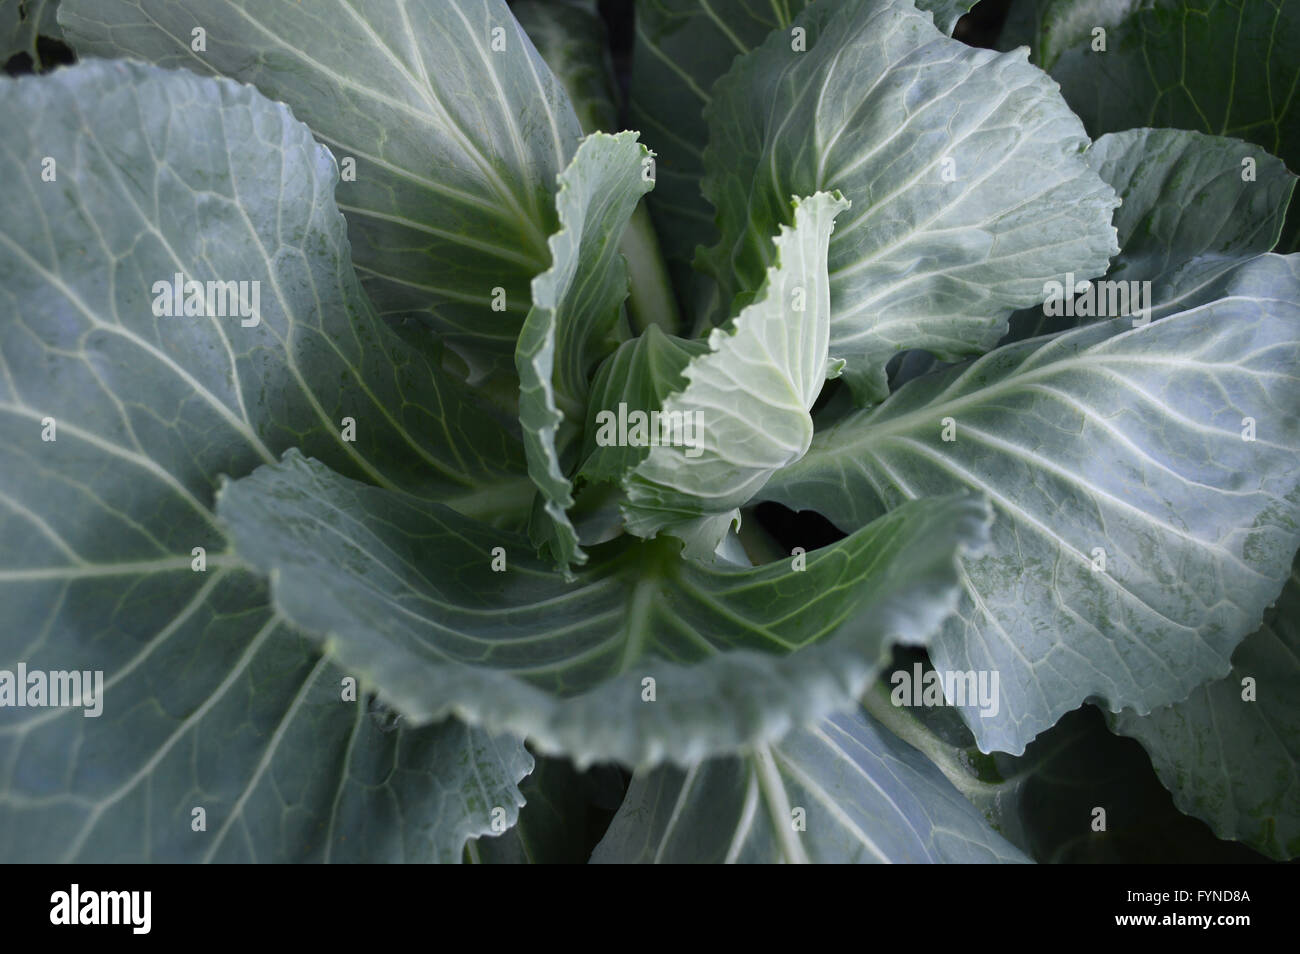 Cabbage, Brassica oleracea, Family Brassicaceae, Central of Thailand Stock Photo